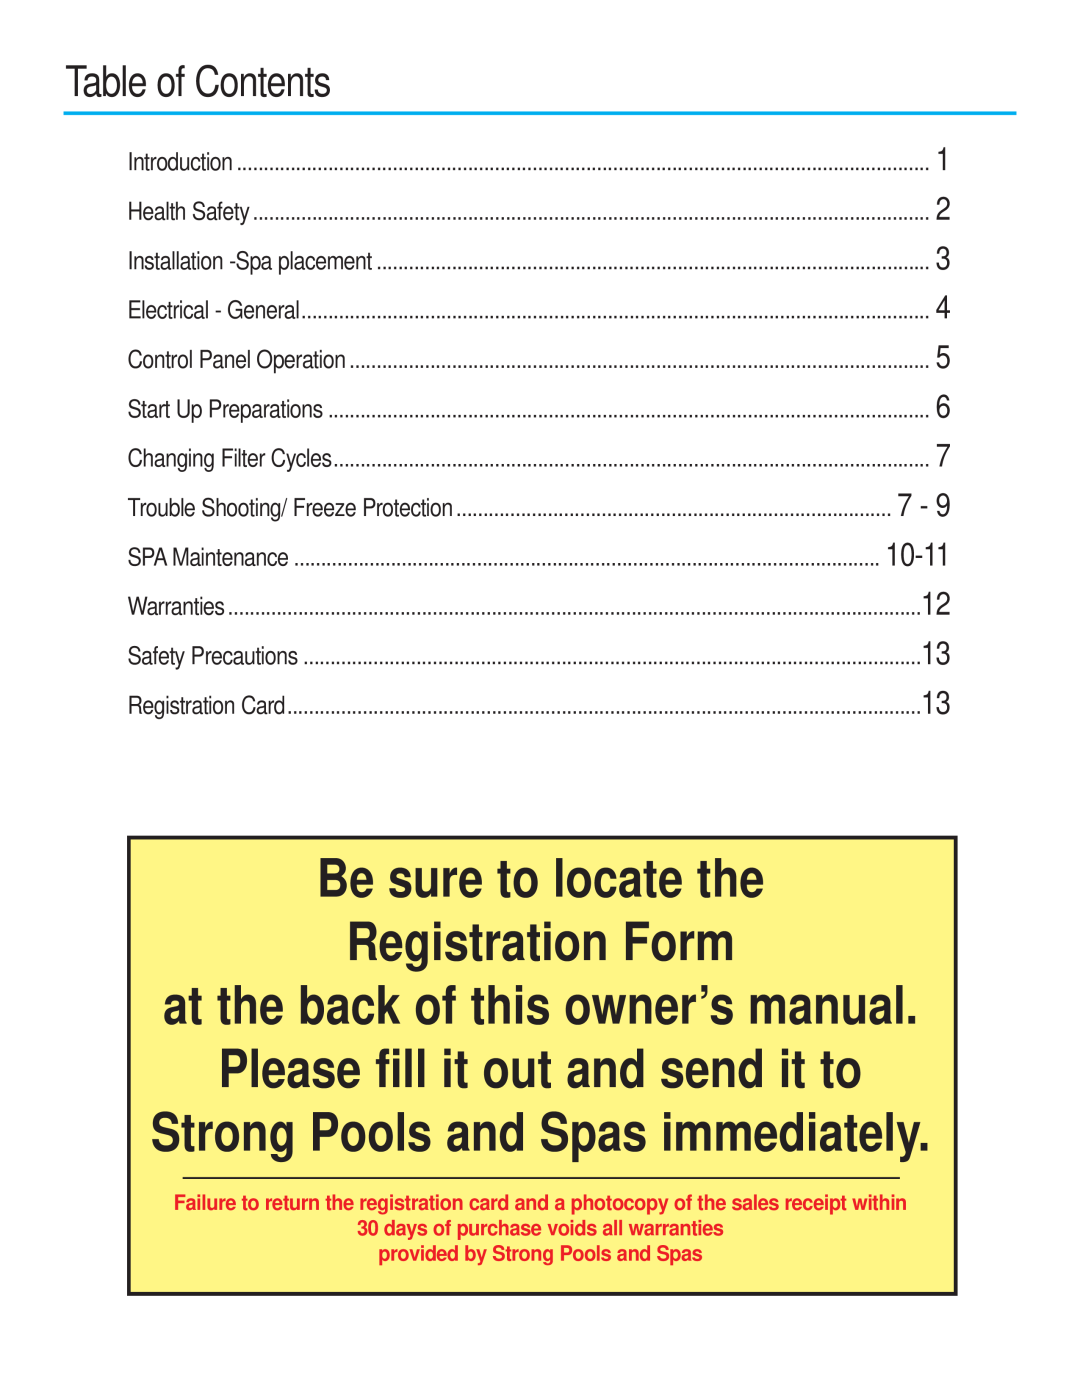 Strong Pools and Spas Maui Spa owner manual Table of Contents, Be sure to locate the Registration Form 